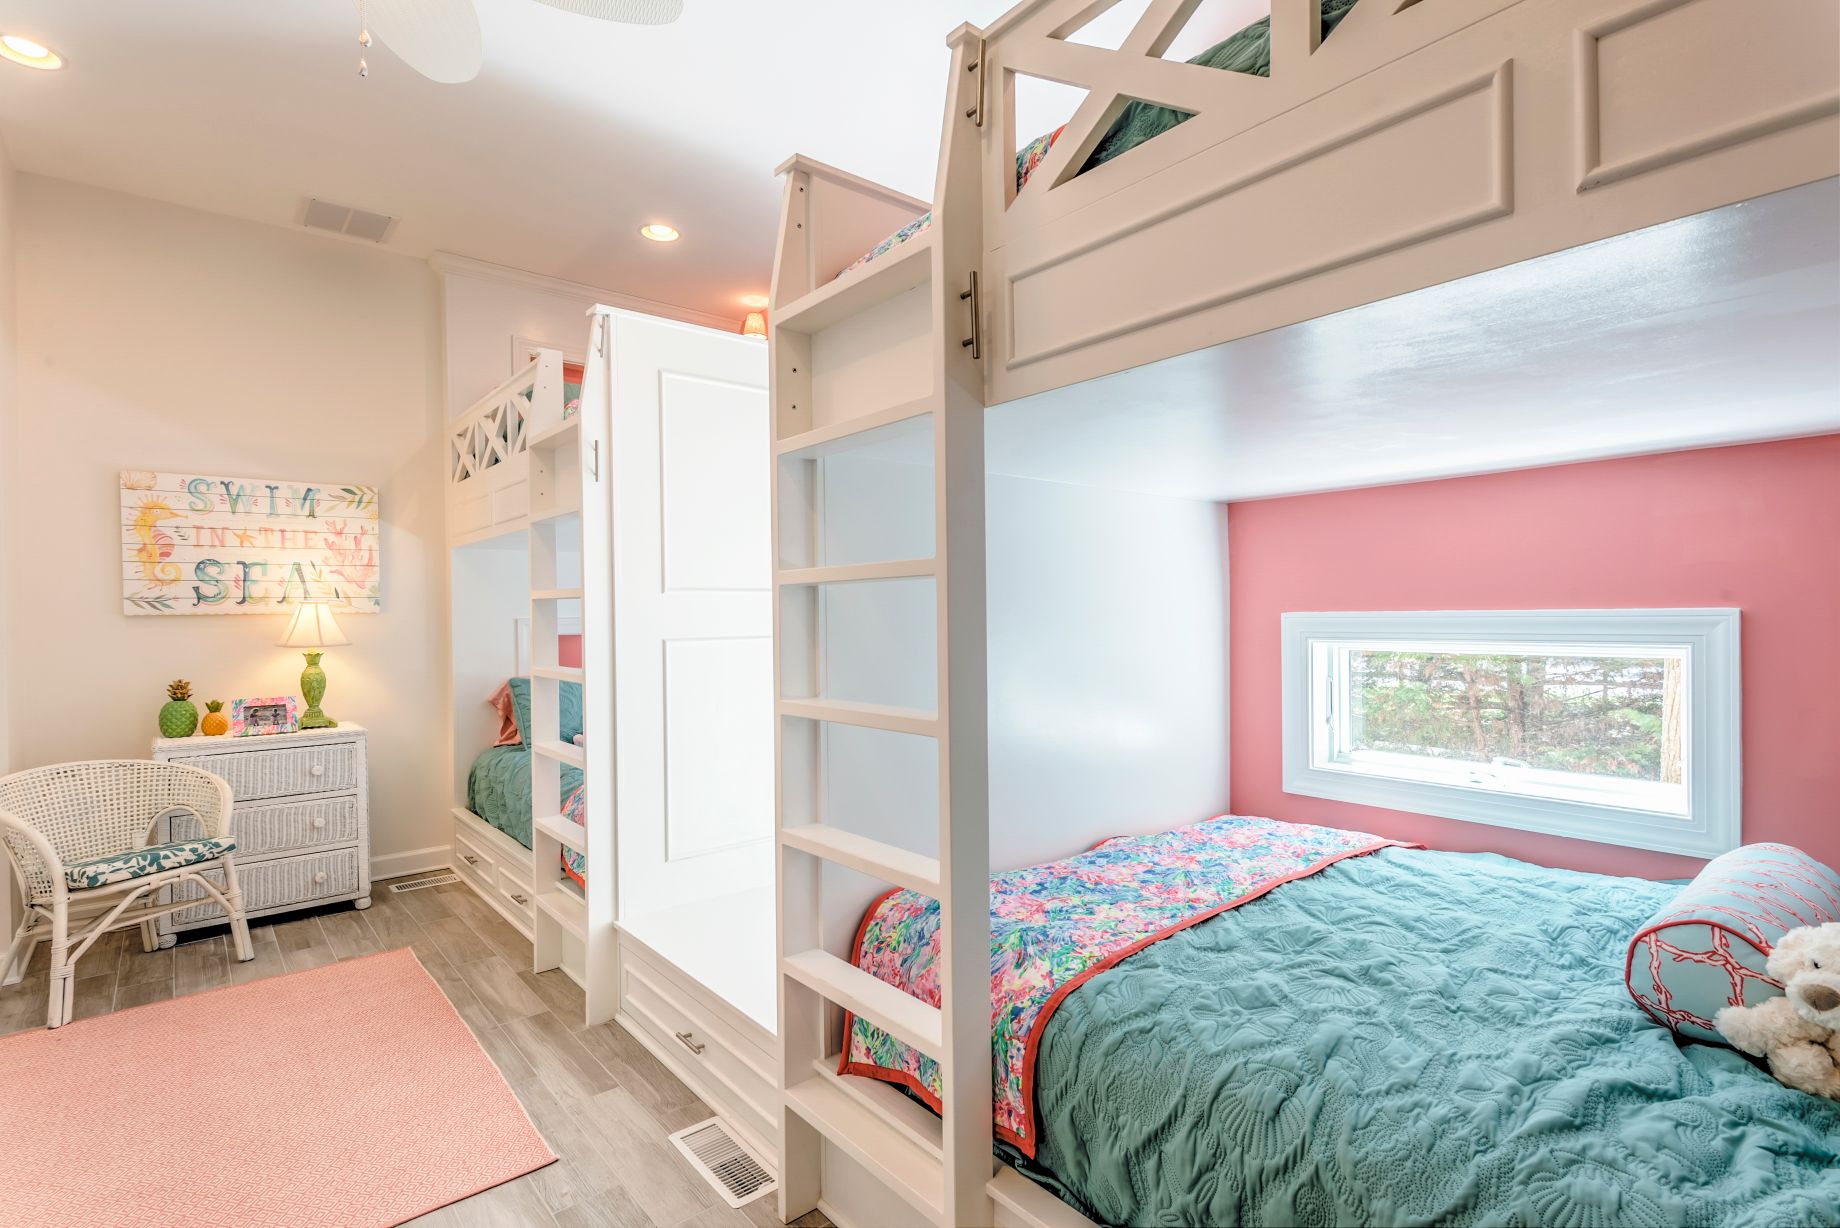 Addition in Juniper Court, Ocean Pines MD - Kids Bedroom with Cozy Bunk Beds and Vintage Furniture